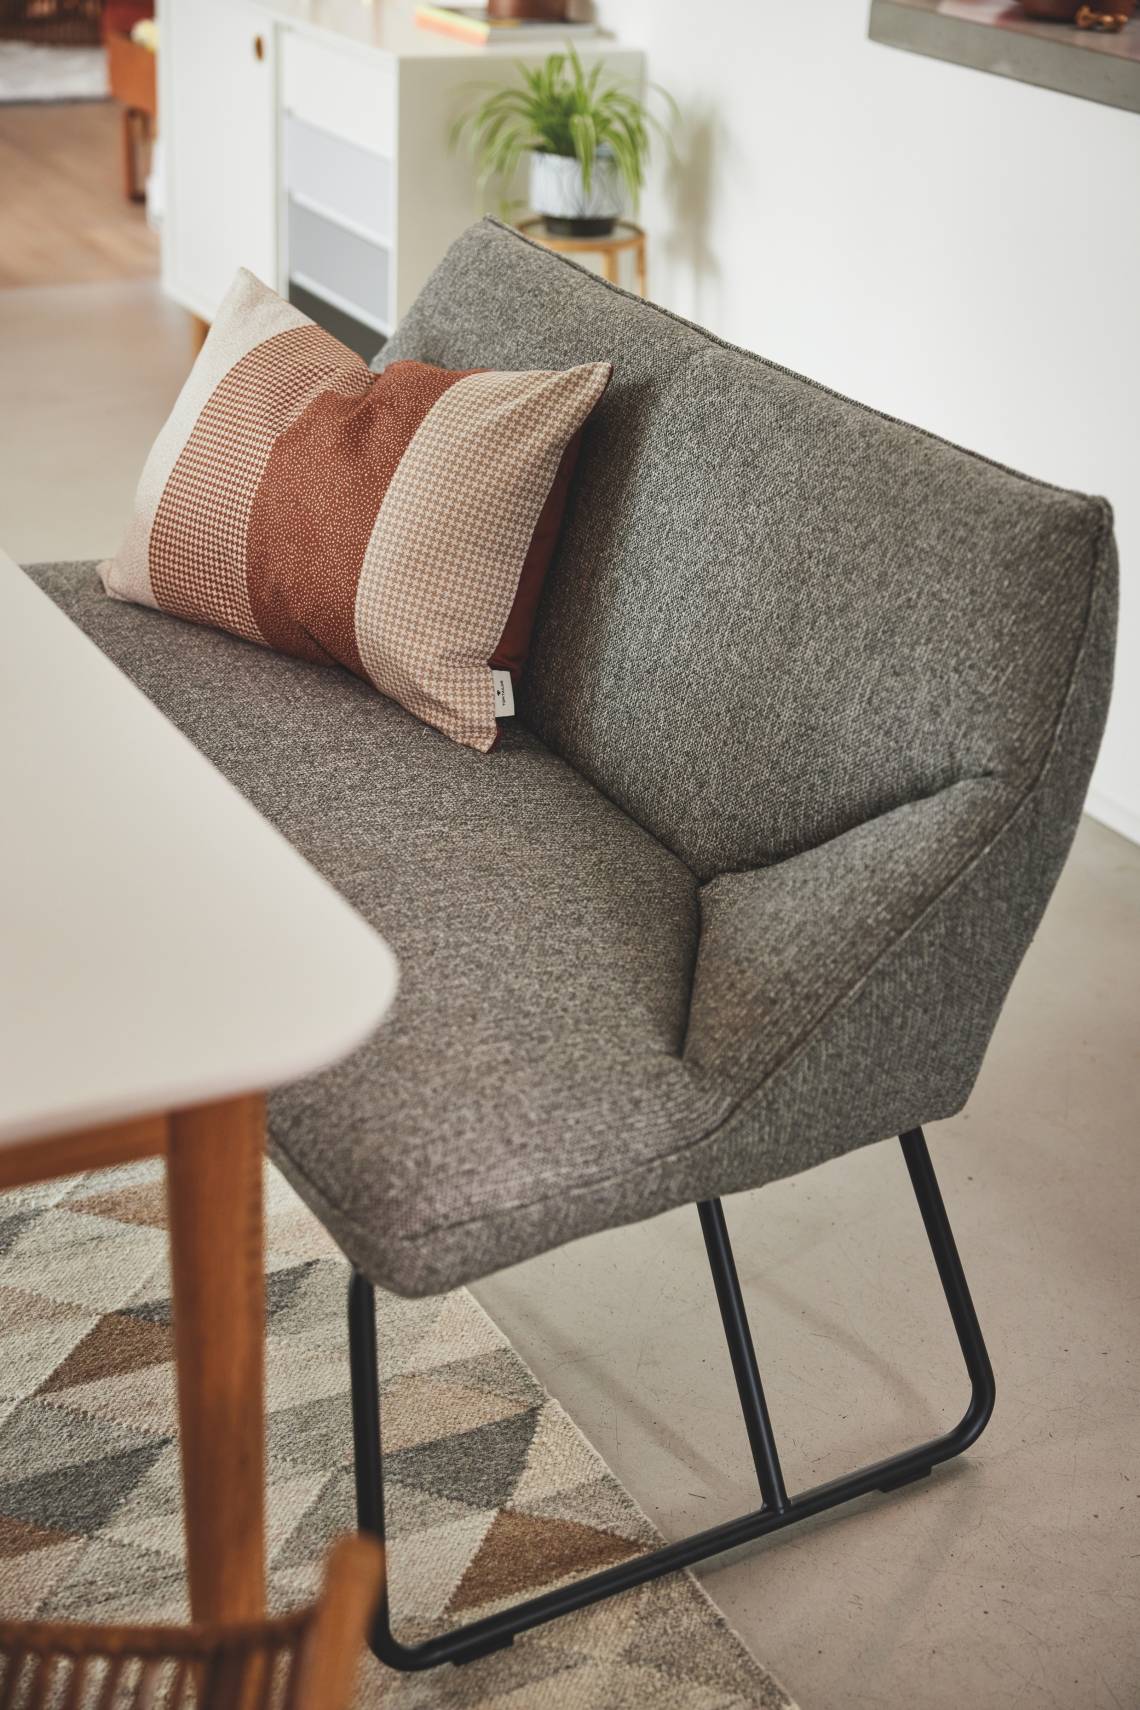 Tom Tailor Home - CUSHION DININGBENCH - Sitzbank | TrendXPRESS